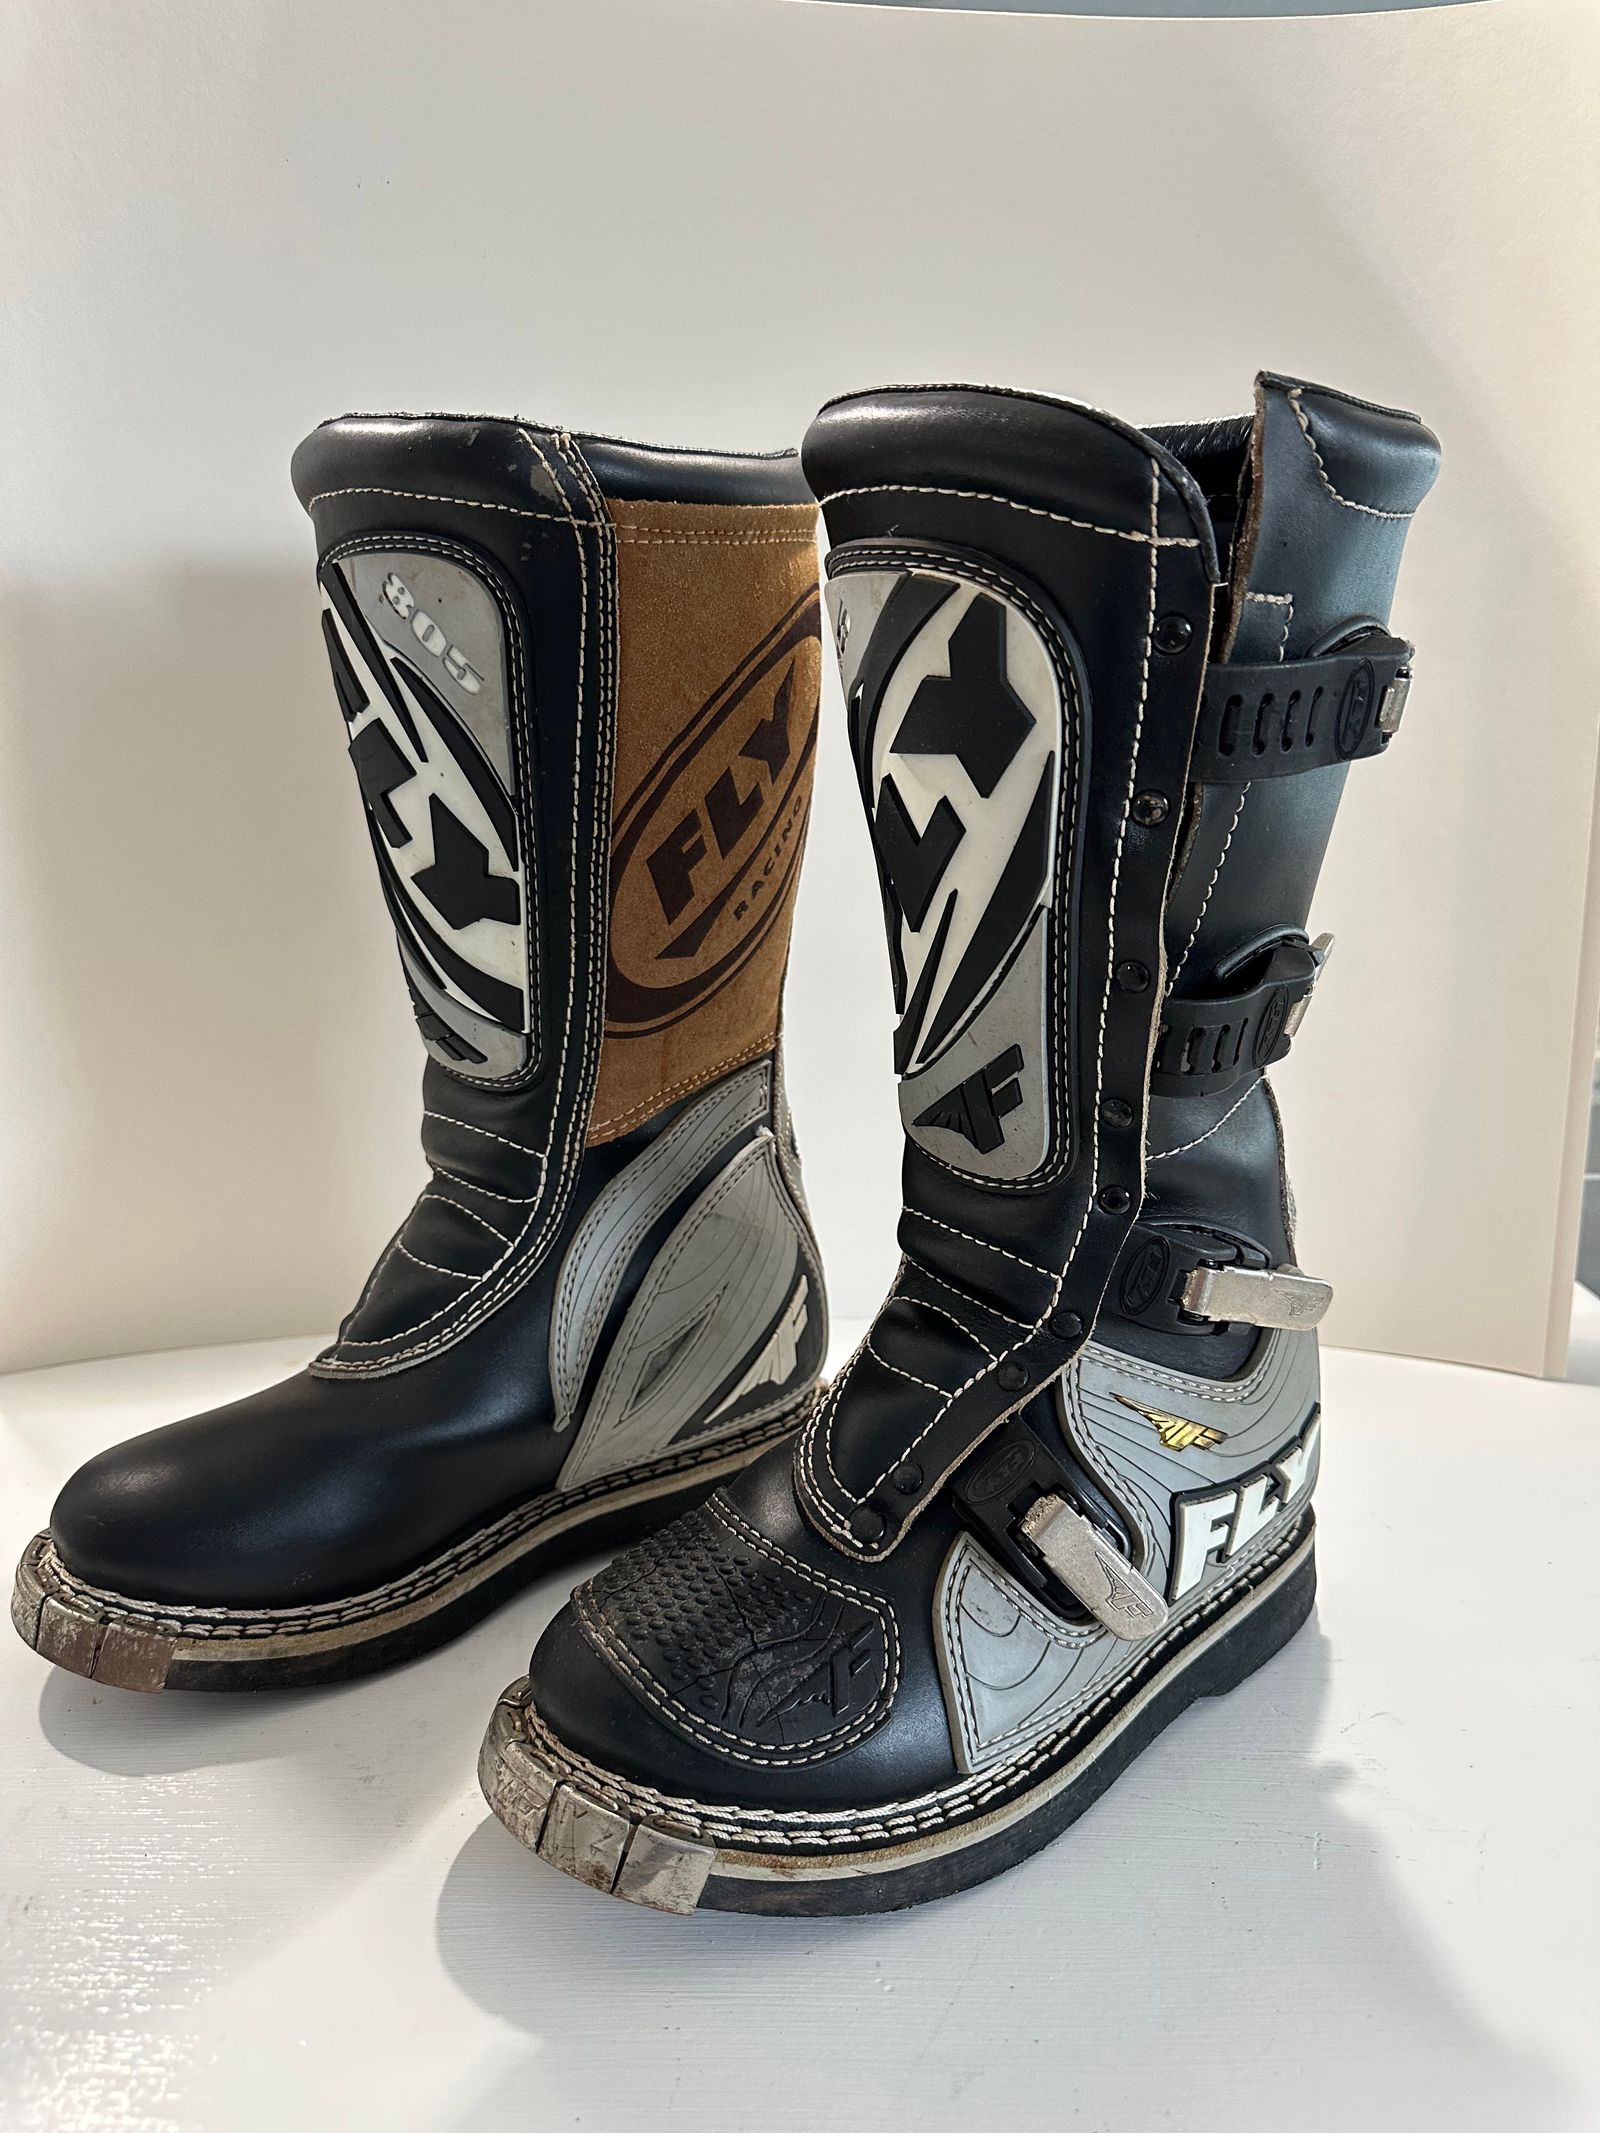 Fly Racing 805 Boots - Size 7